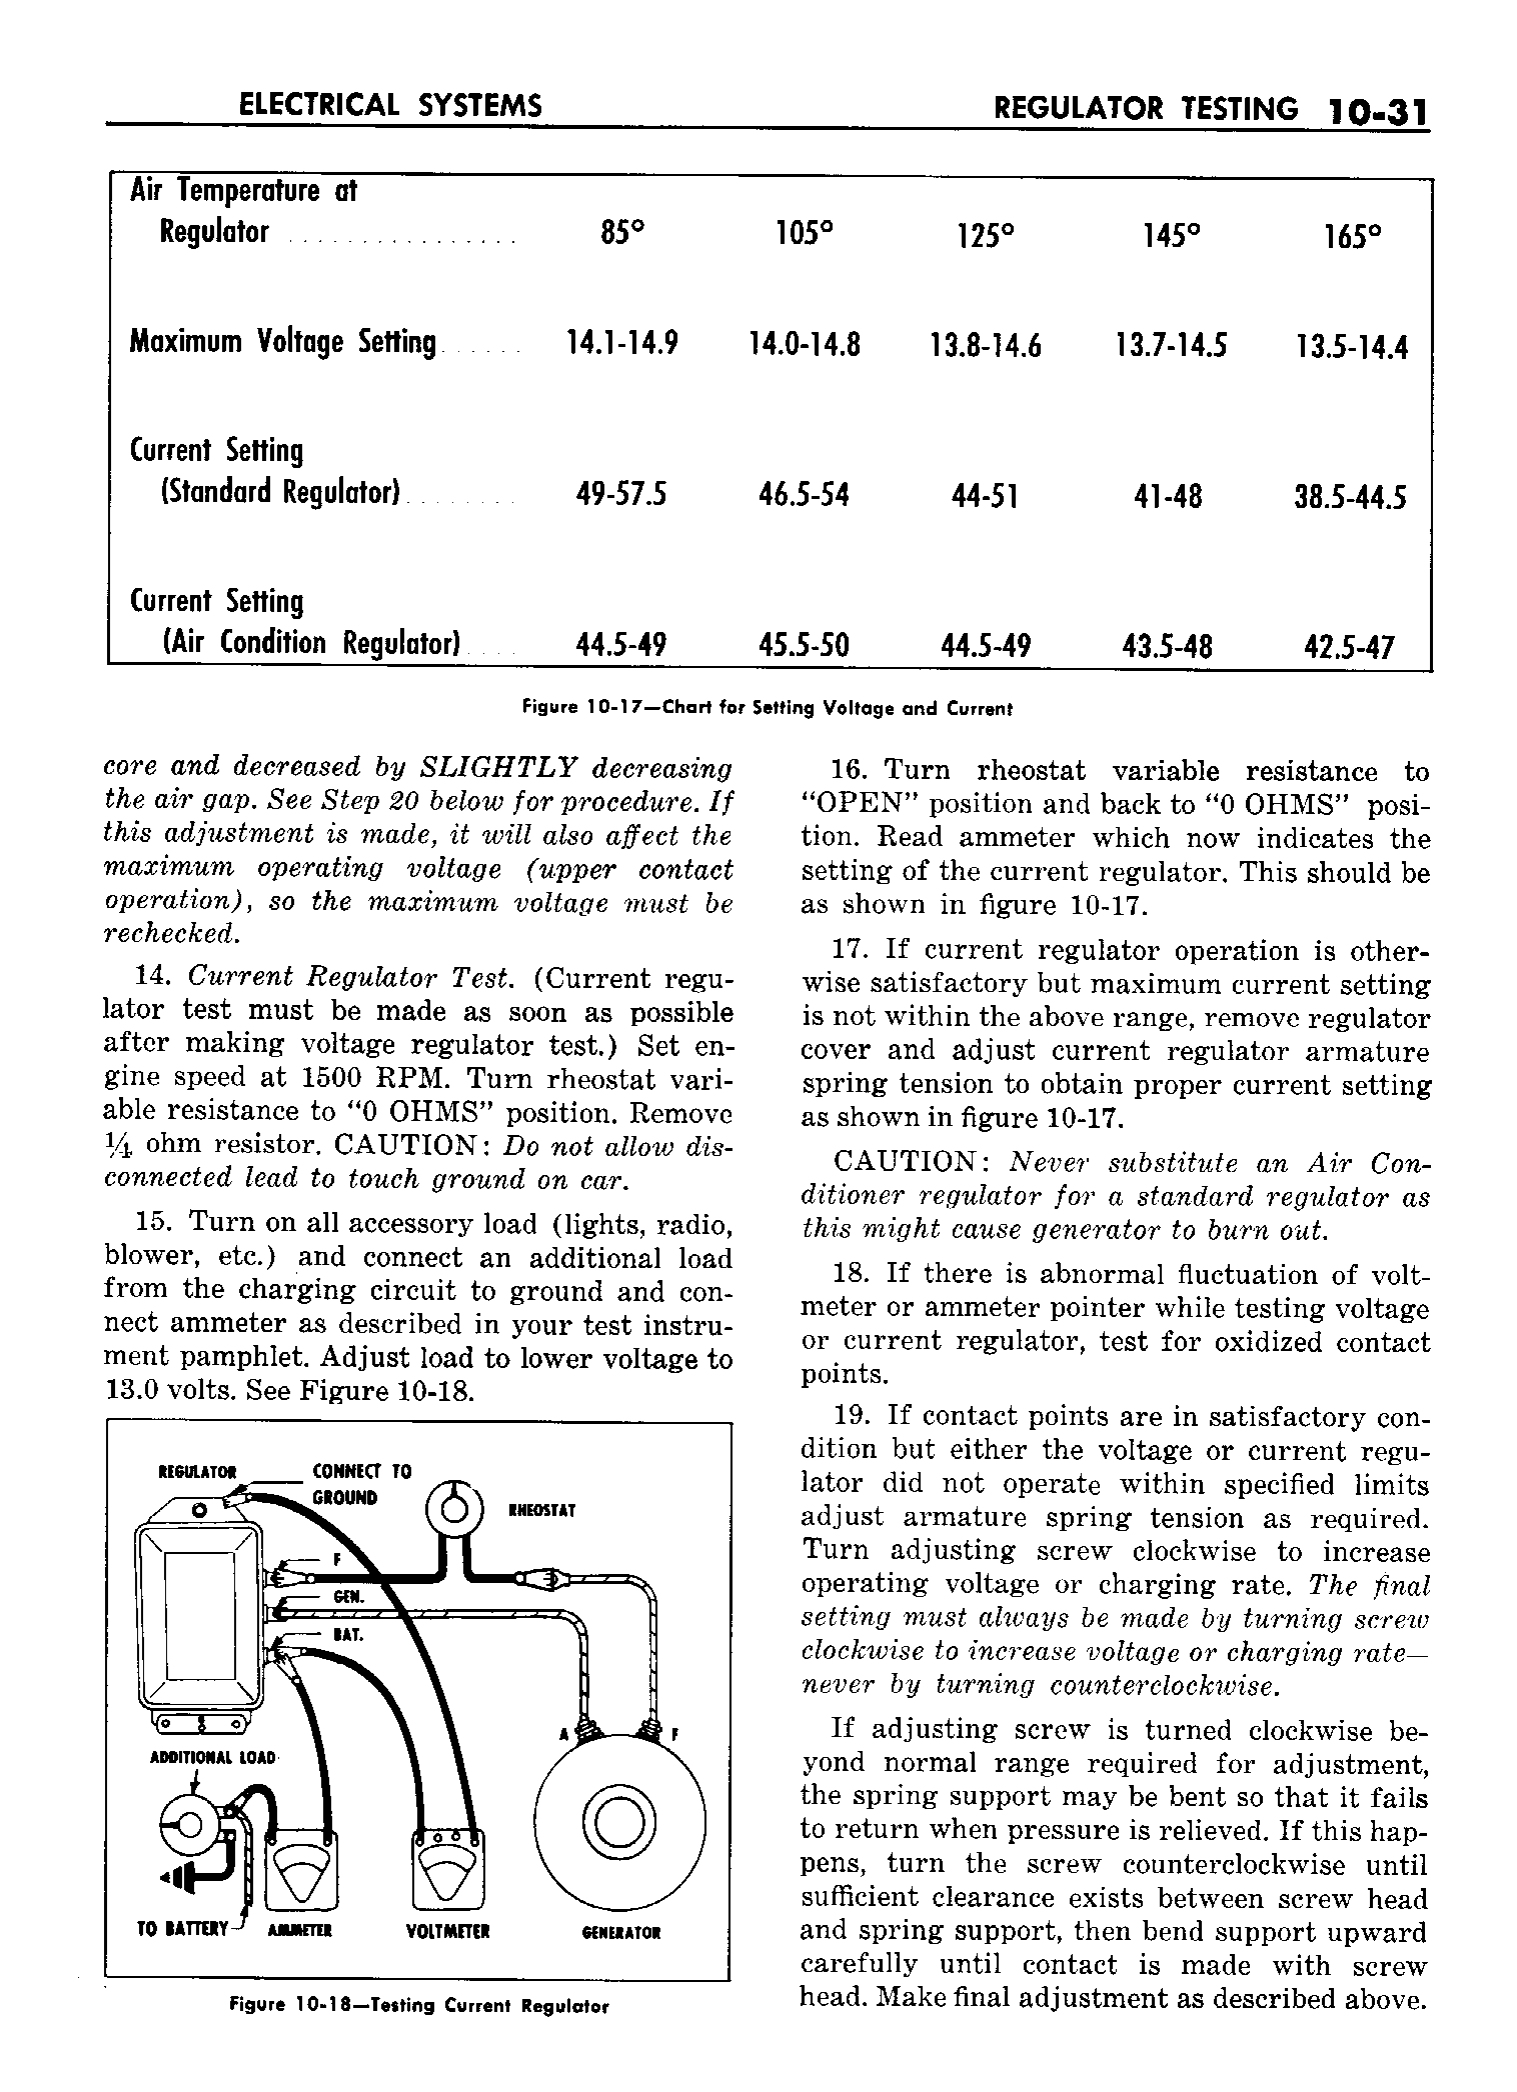 n_11 1958 Buick Shop Manual - Electrical Systems_31.jpg